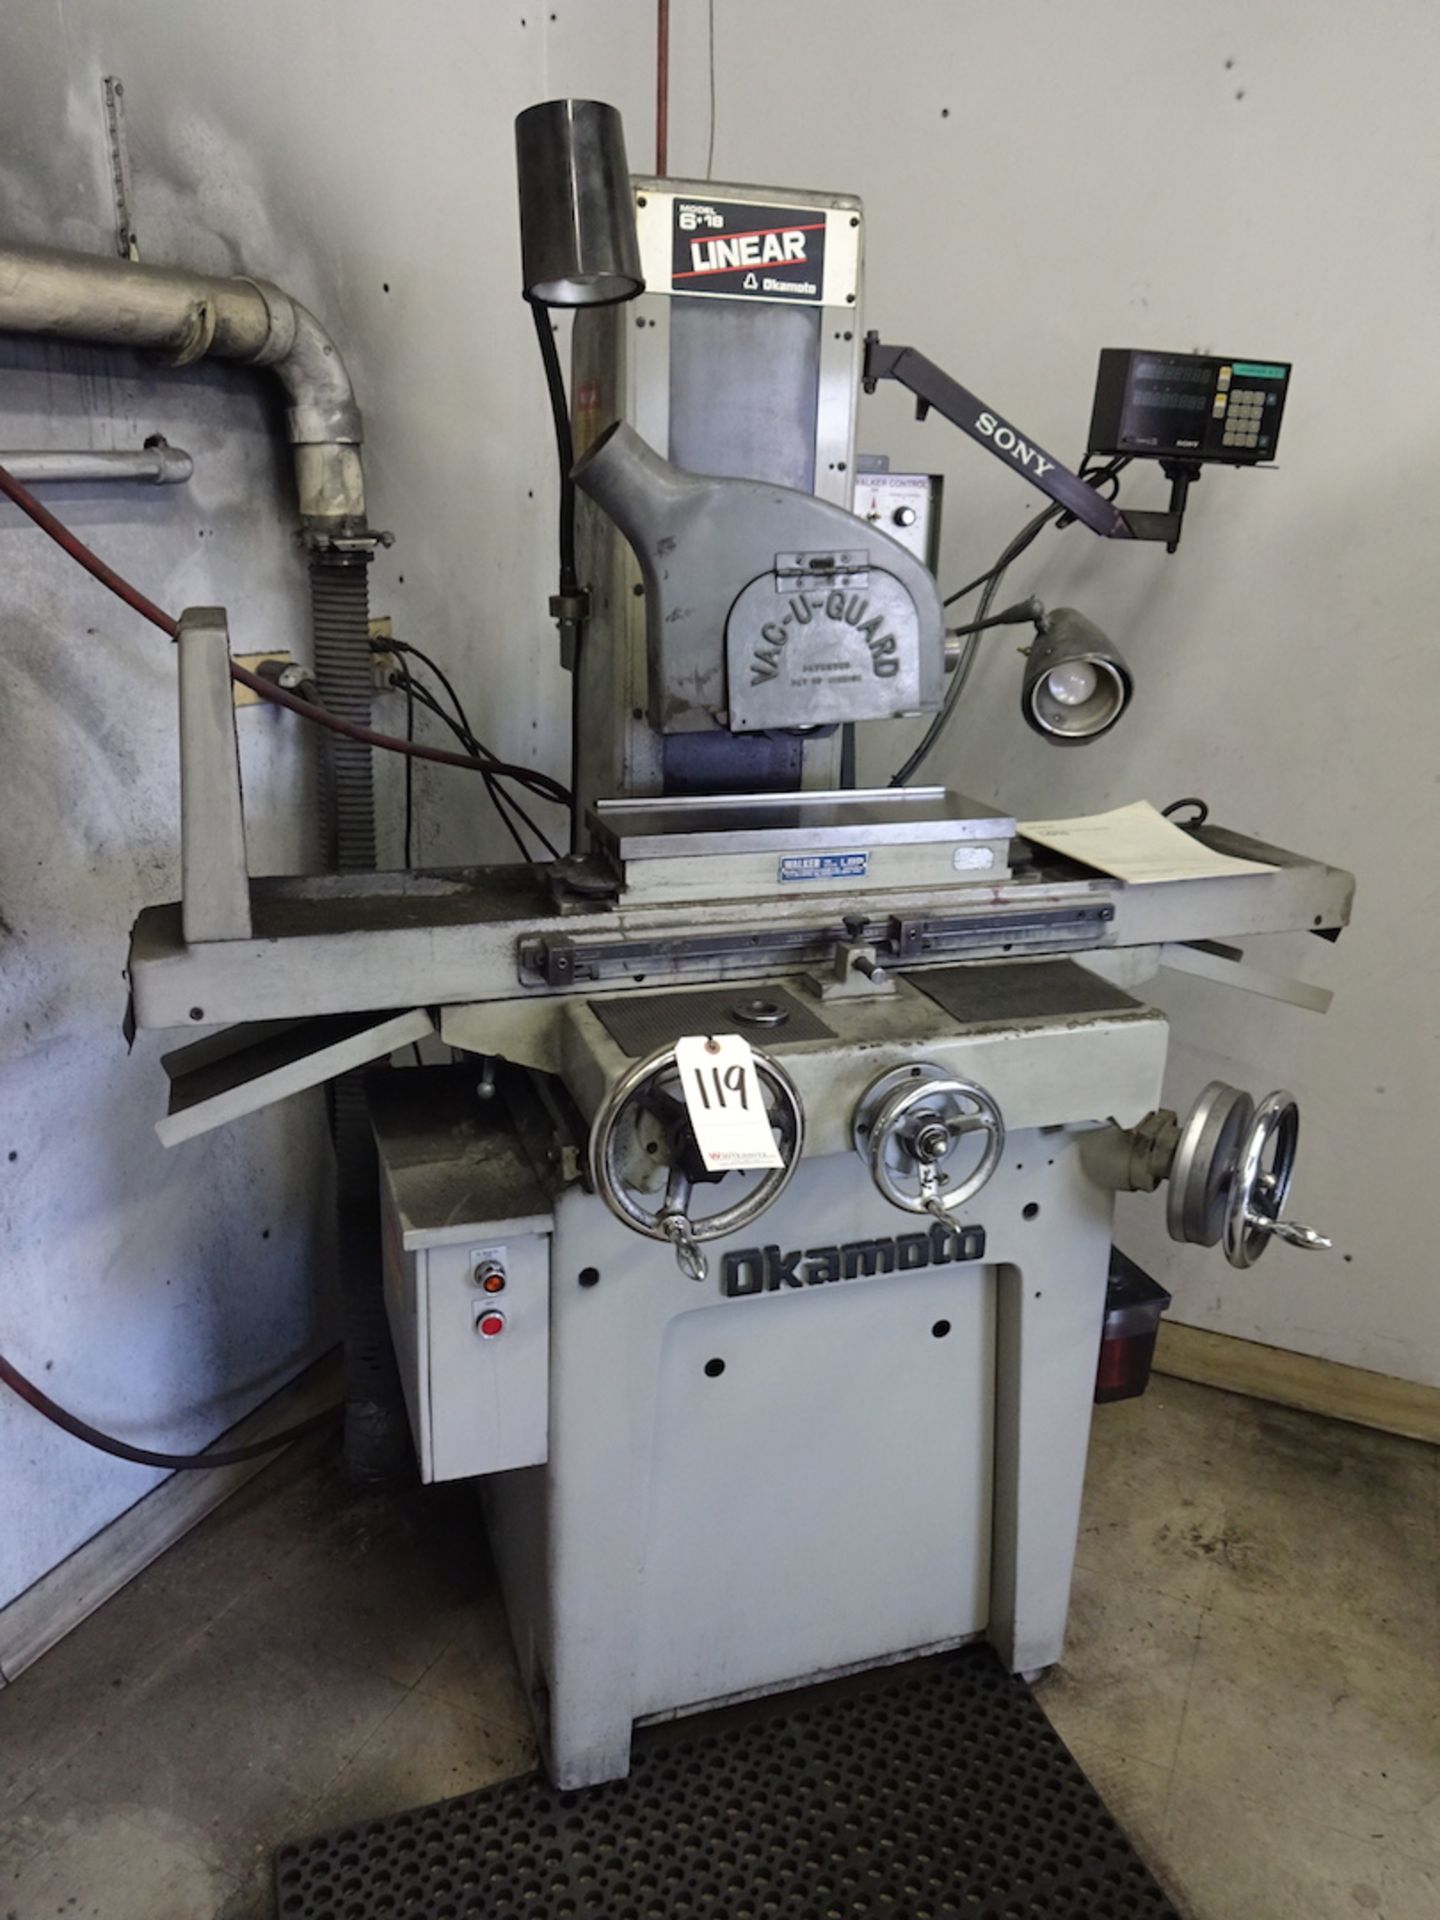 Okamoto 6 in. x 18 in. Model Linear 618 Hand Feed Surface Grinder, S/N 4785, Sony LG10 2-Axis - Image 2 of 6